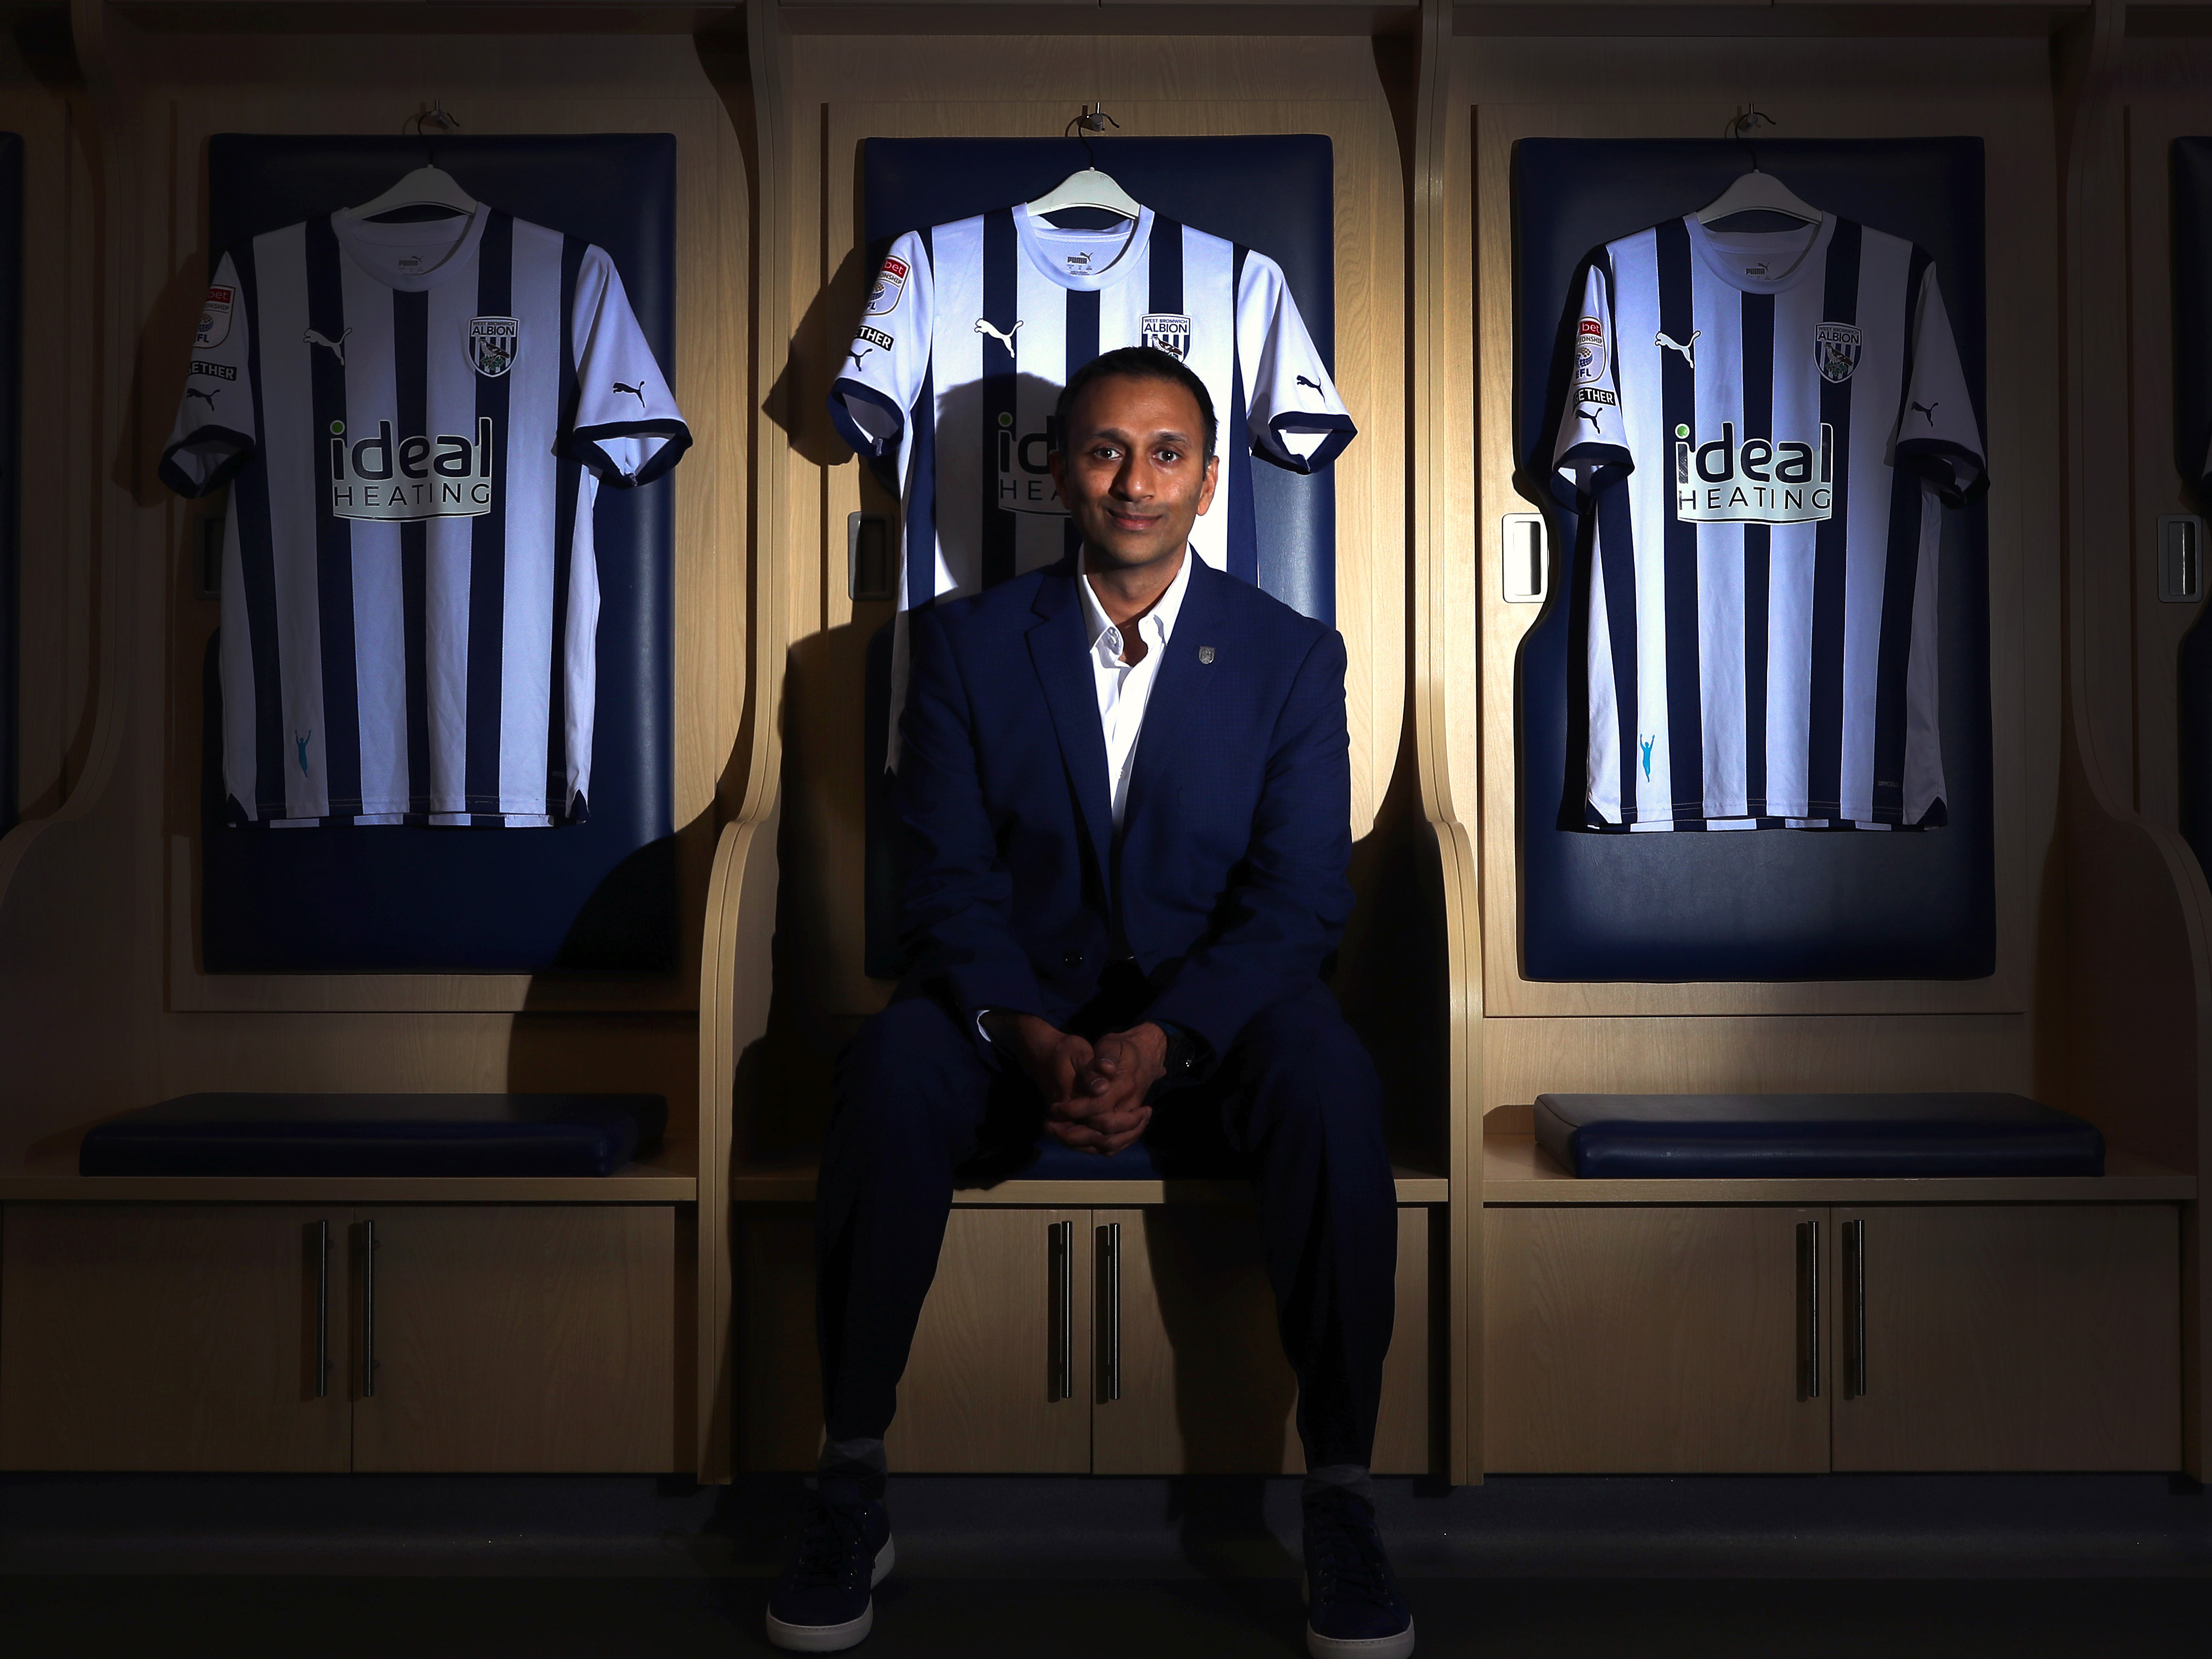 Shilen Patel sitting in the home dressing room looking at the camera surrounded by WBA home shirts